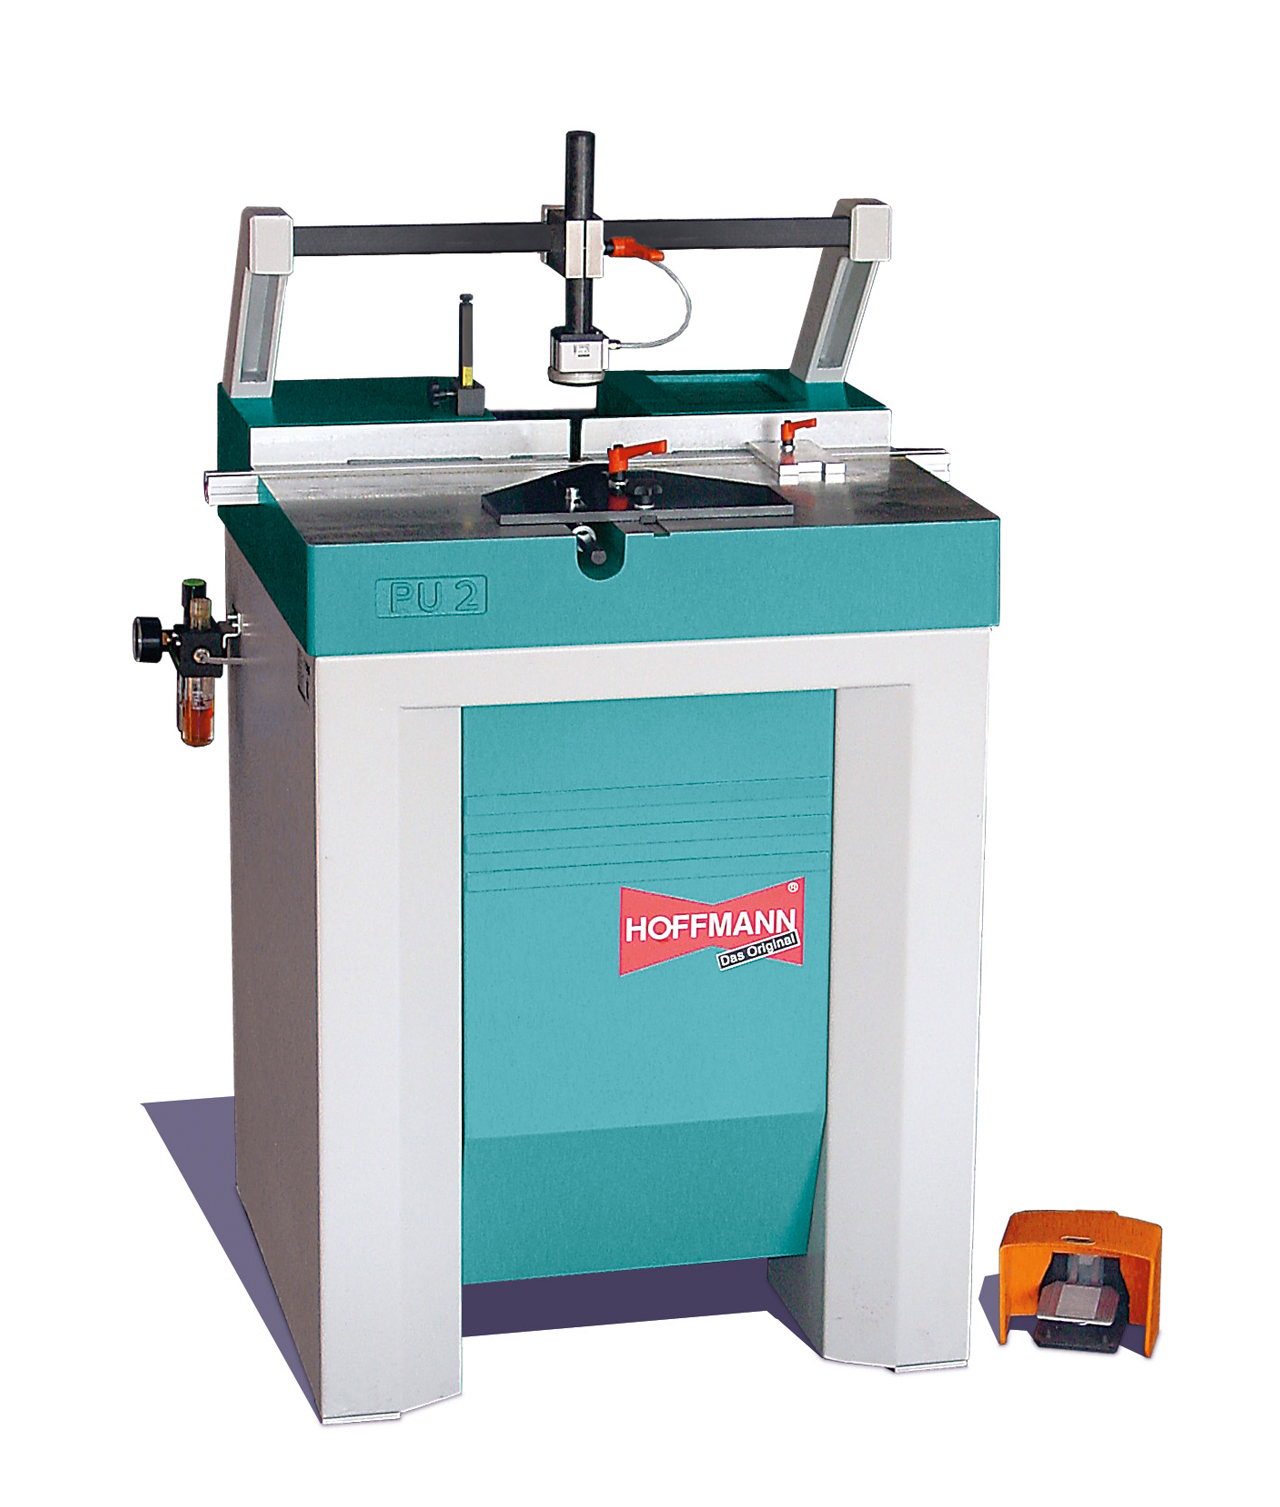 Hoffmann PU2 Pneumatic Dovetail Routing Machine (New) Item # NFE-349